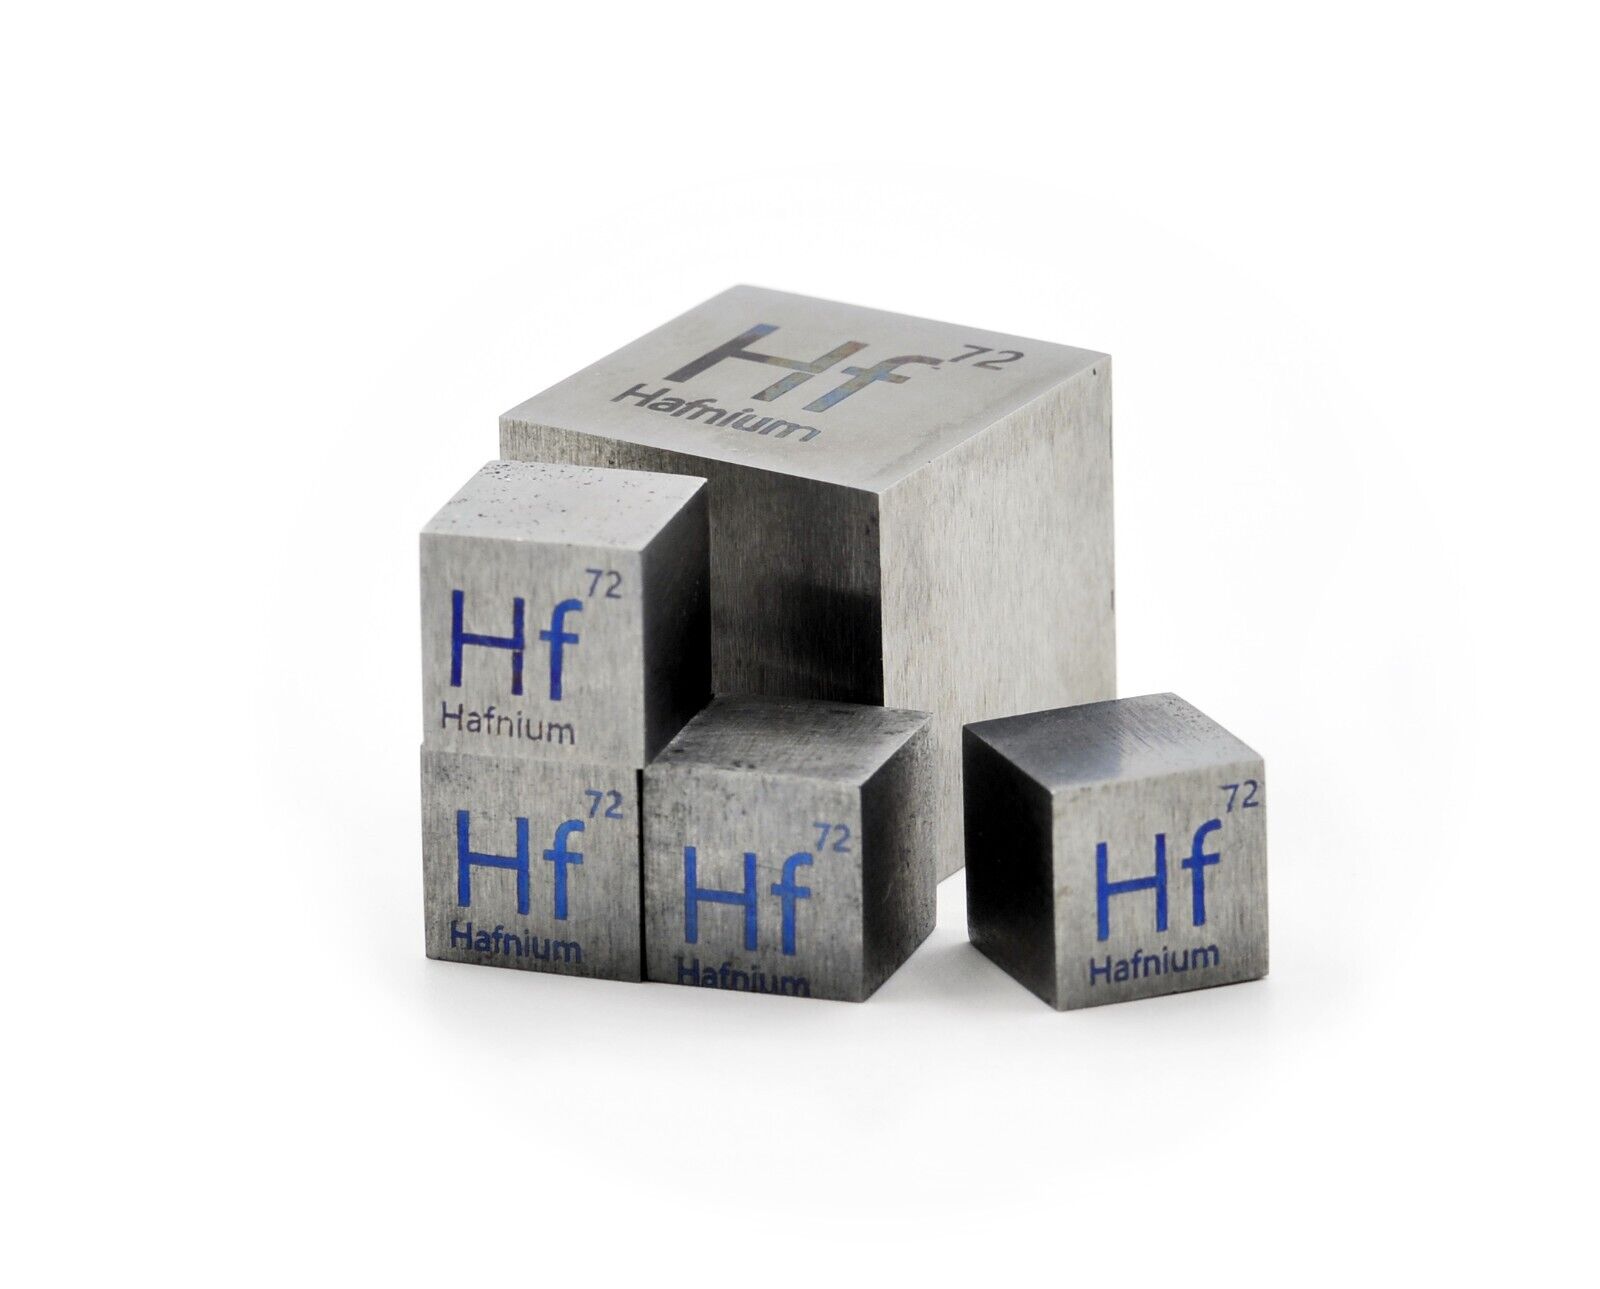 Hafnium Metal 10mm Density Cube 99.9% for Element Collection USA SHIPPING